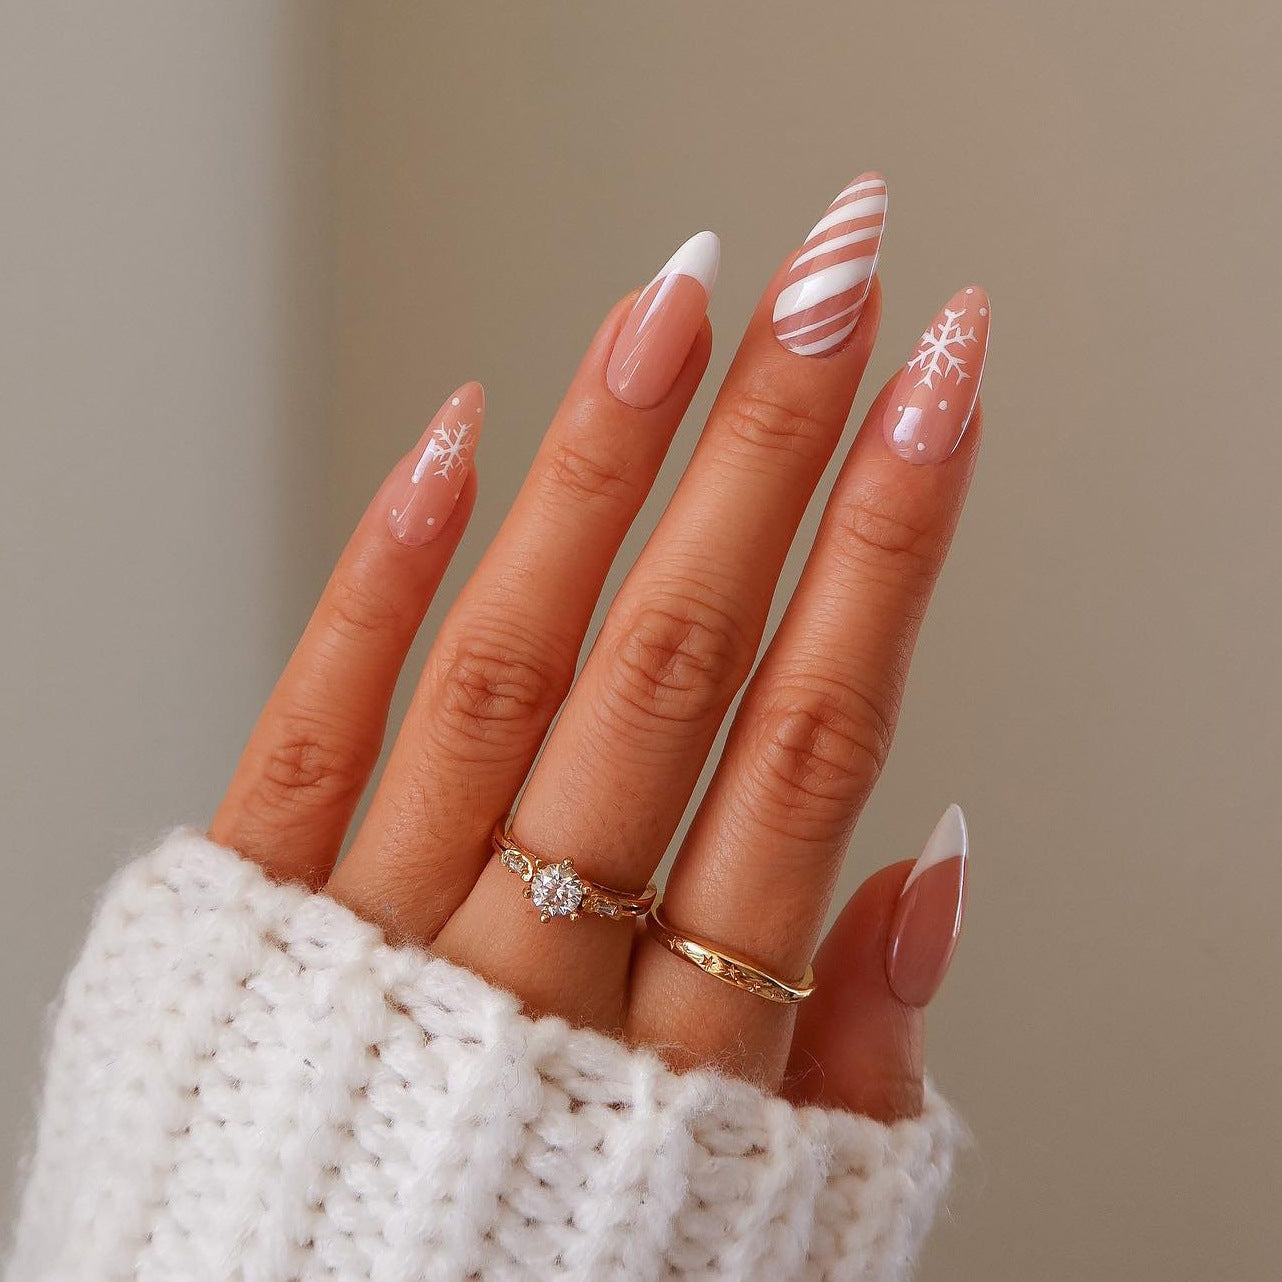 8 Christmas manicure designs that are sure to 'nail' the season